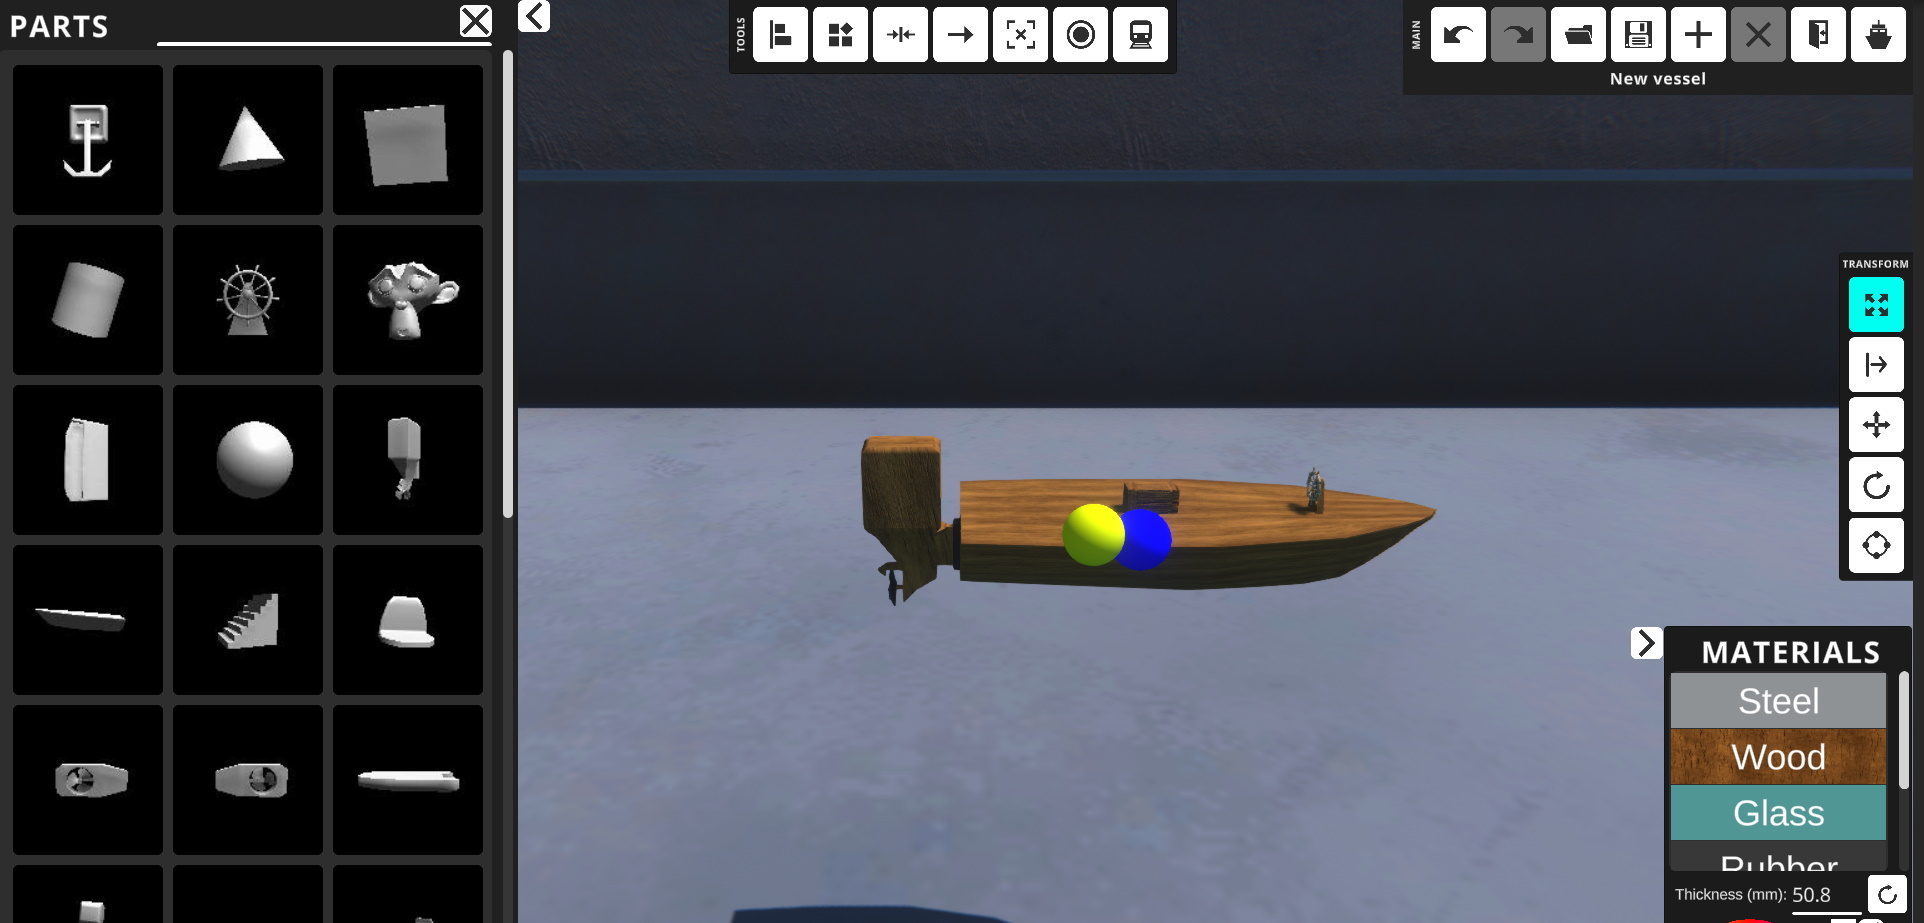 Nautikin Adventures - How to Build a Boat Tutorial - Creating a boat - B20D364